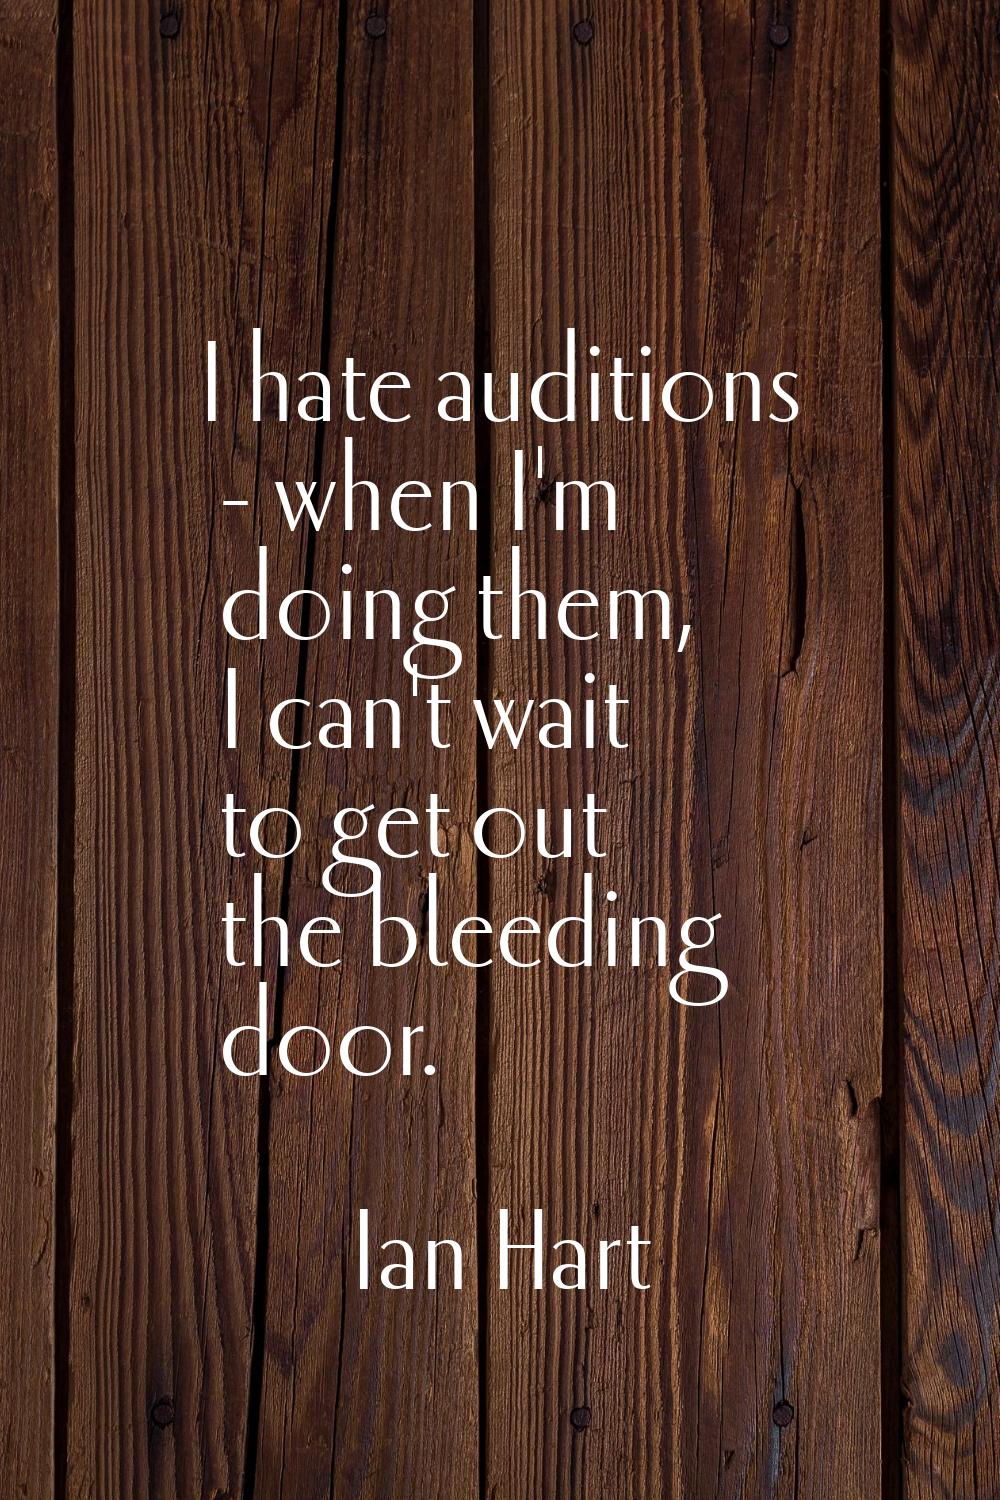 I hate auditions - when I'm doing them, I can't wait to get out the bleeding door.